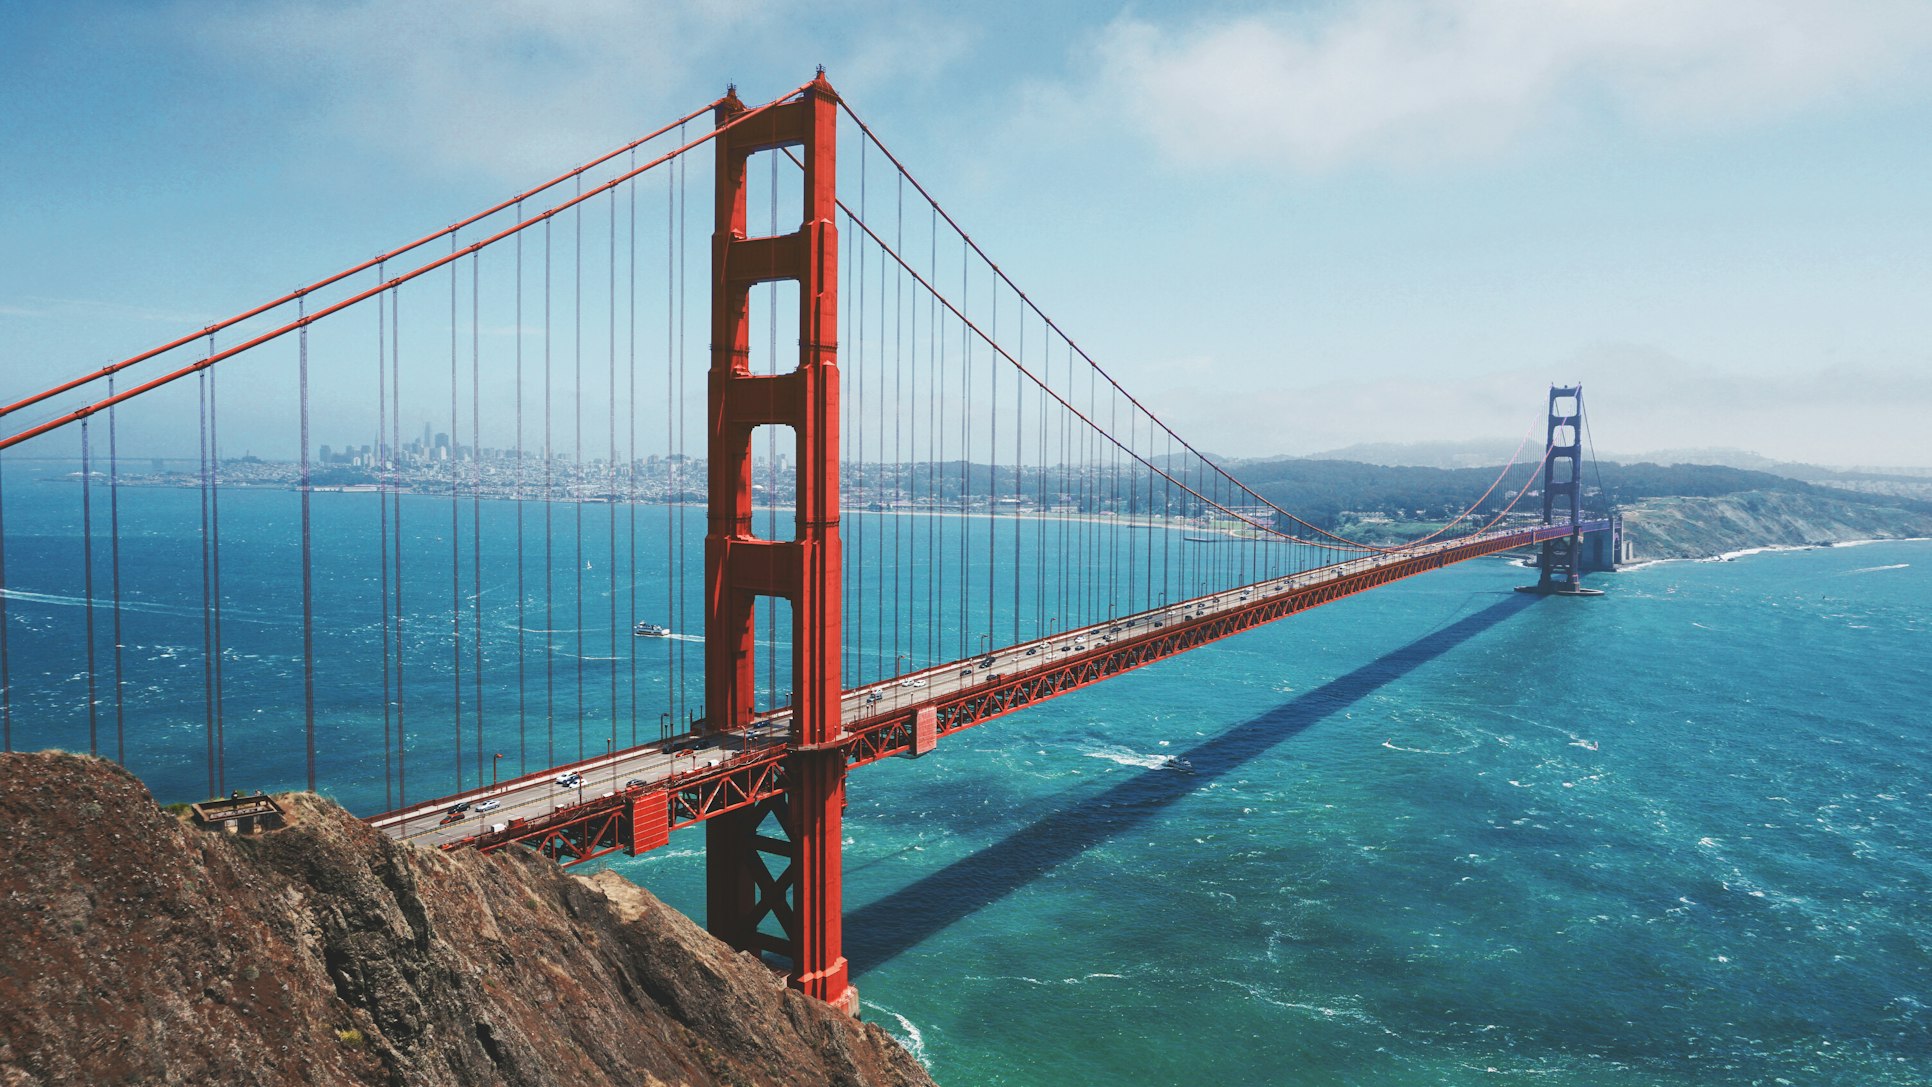 California Travel Guide - Attractions, What to See, Do, Costs, FAQs